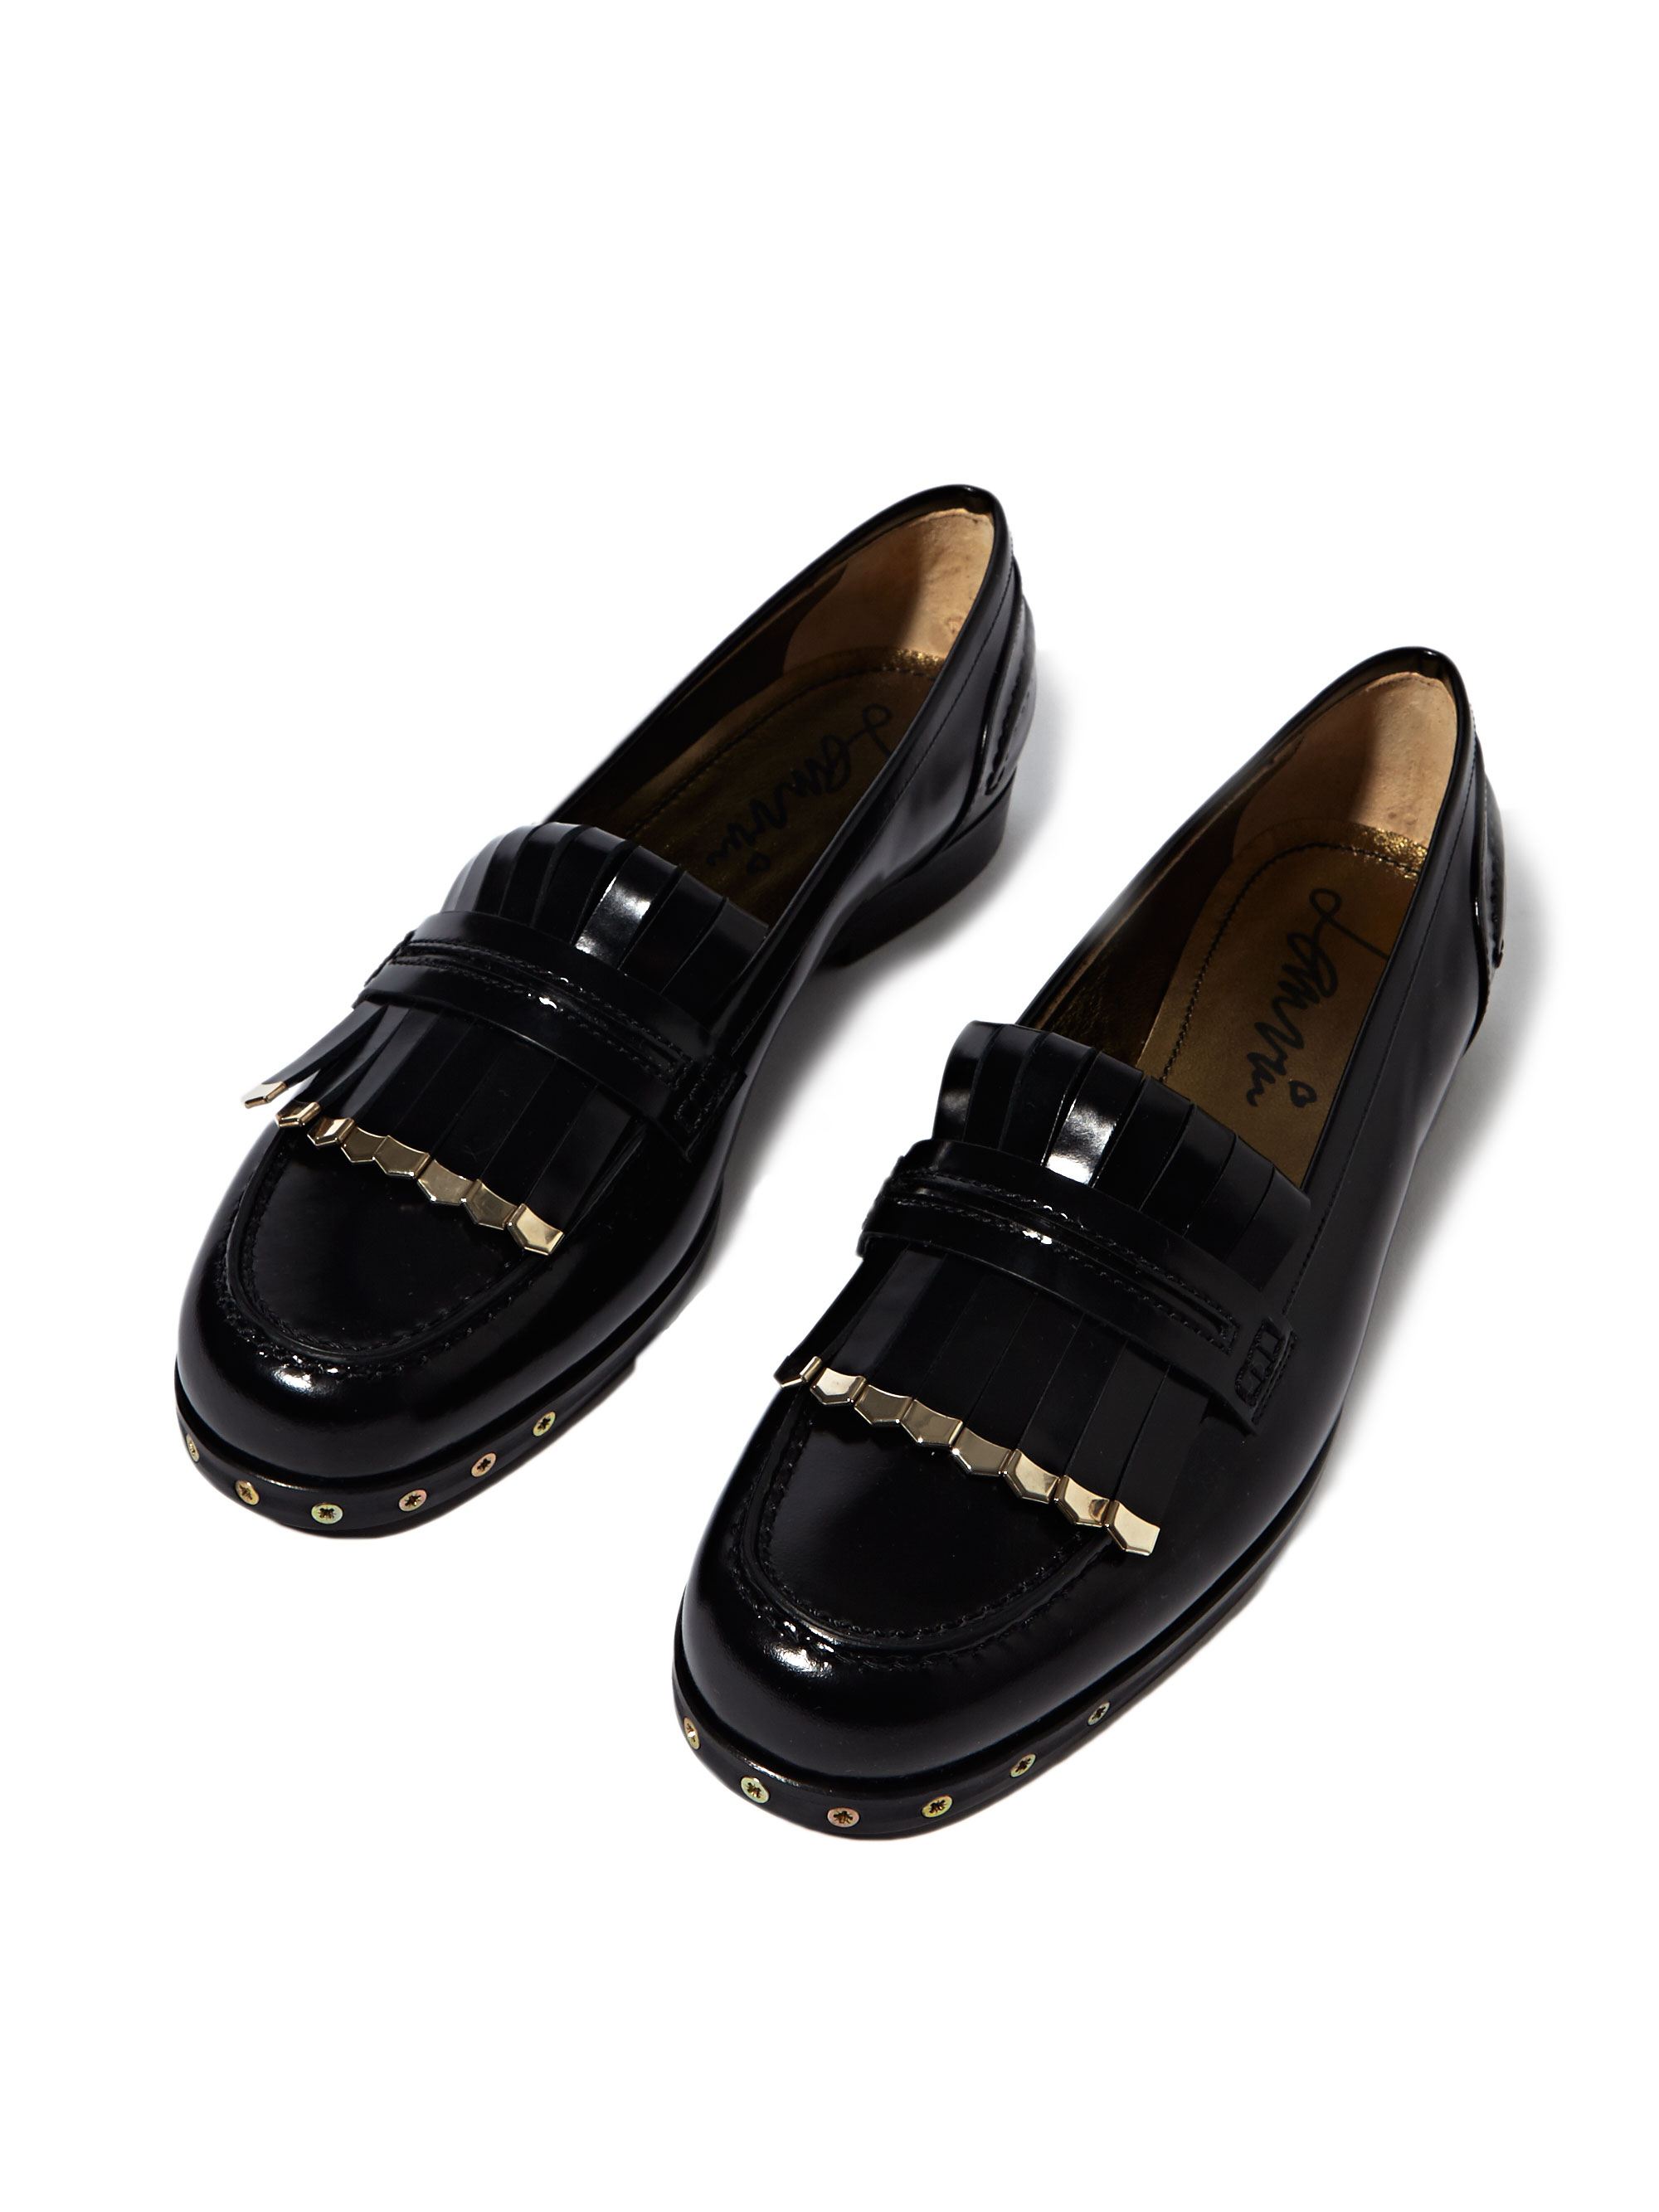 Lanvin Womens Loafer Shoes in Black - Lyst